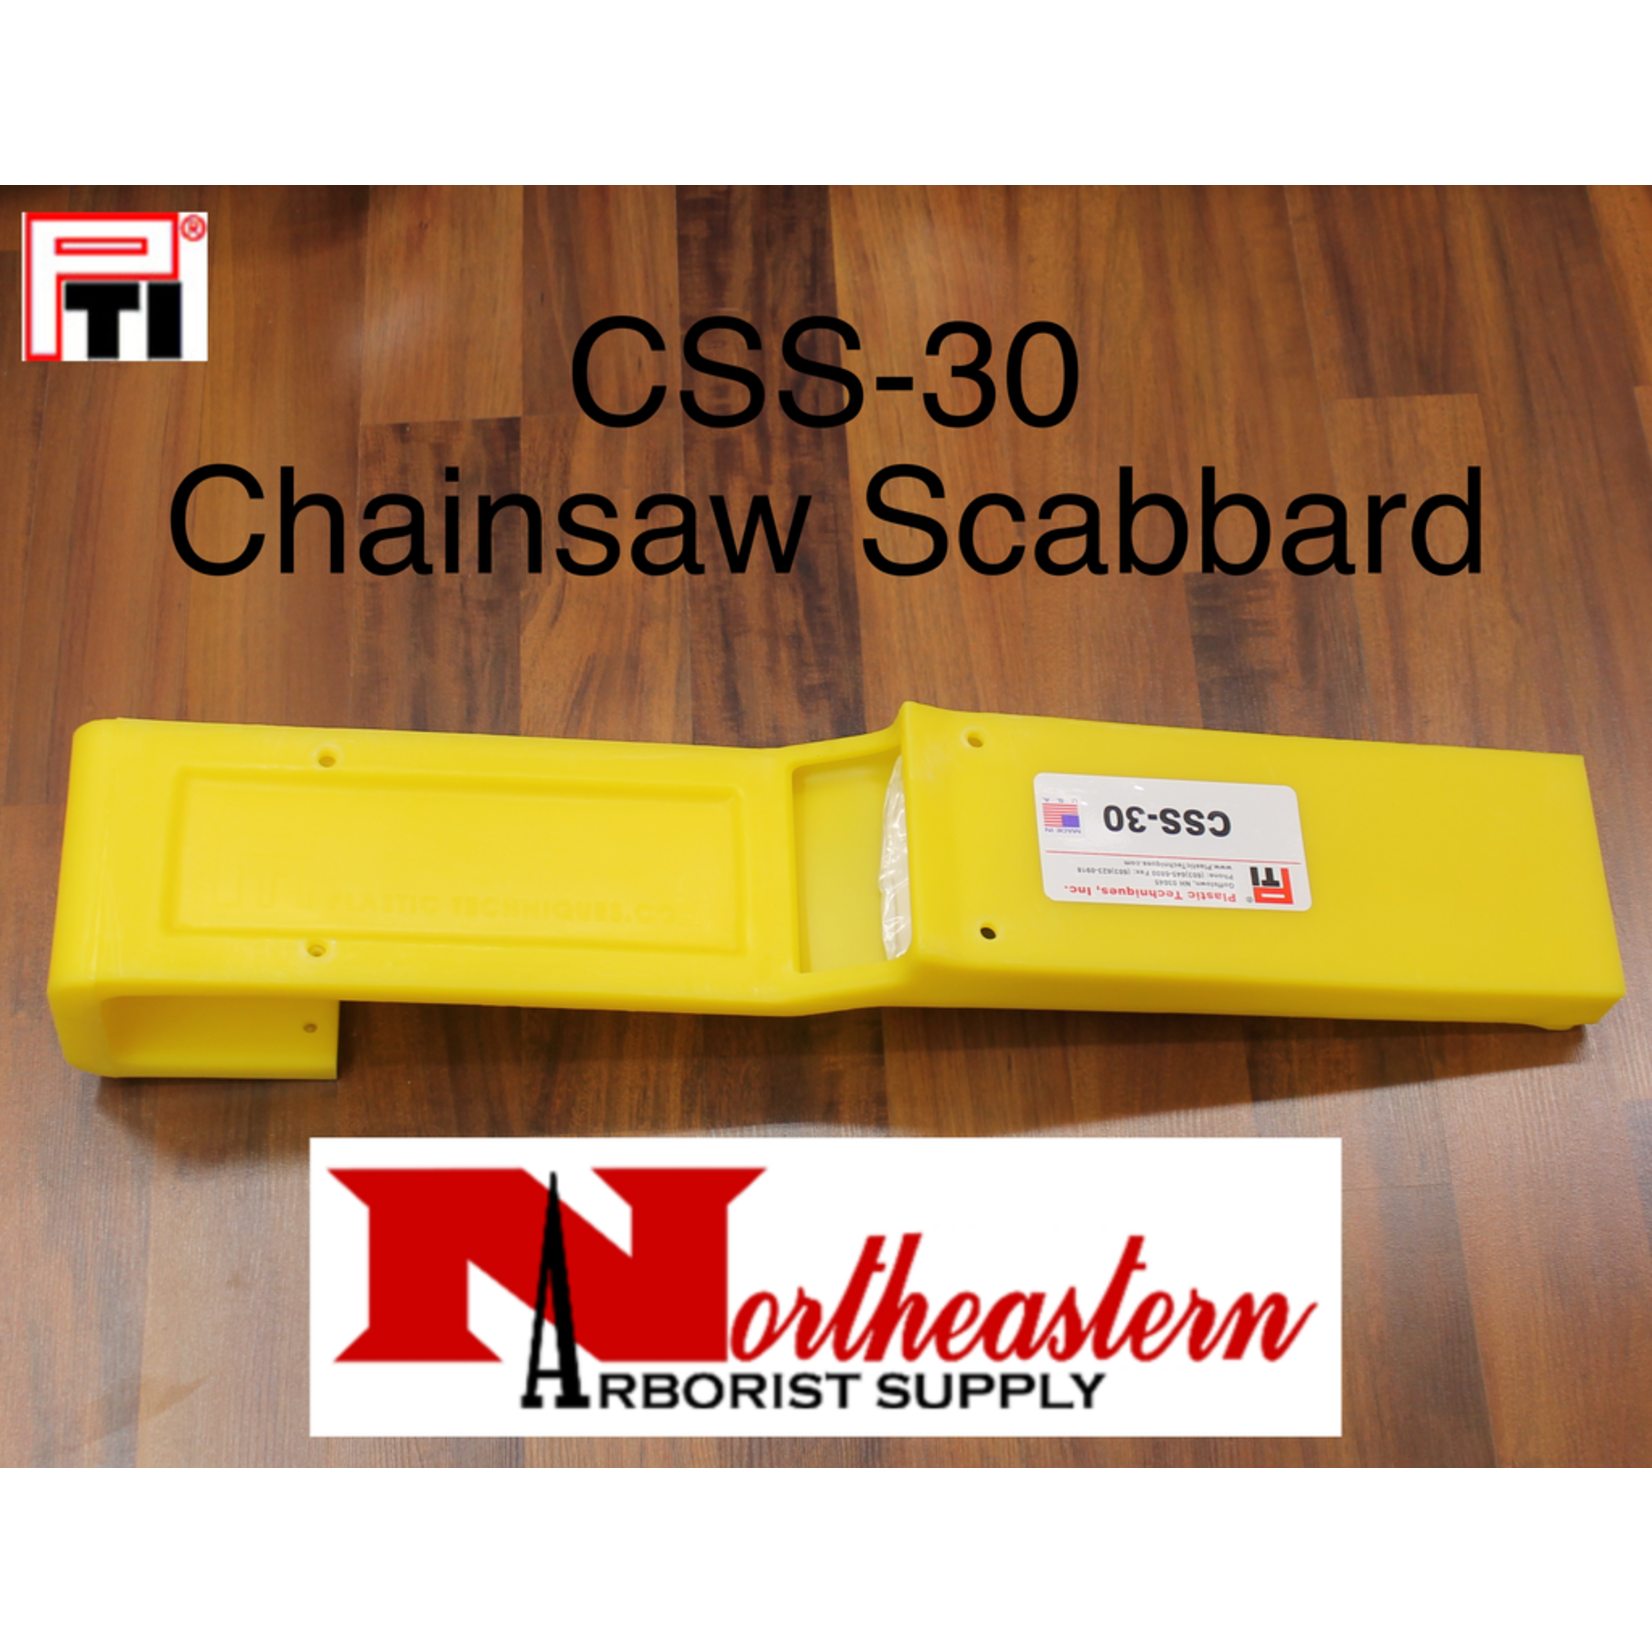 PTI Scabbard, Chainsaw For Bucket - Yellow